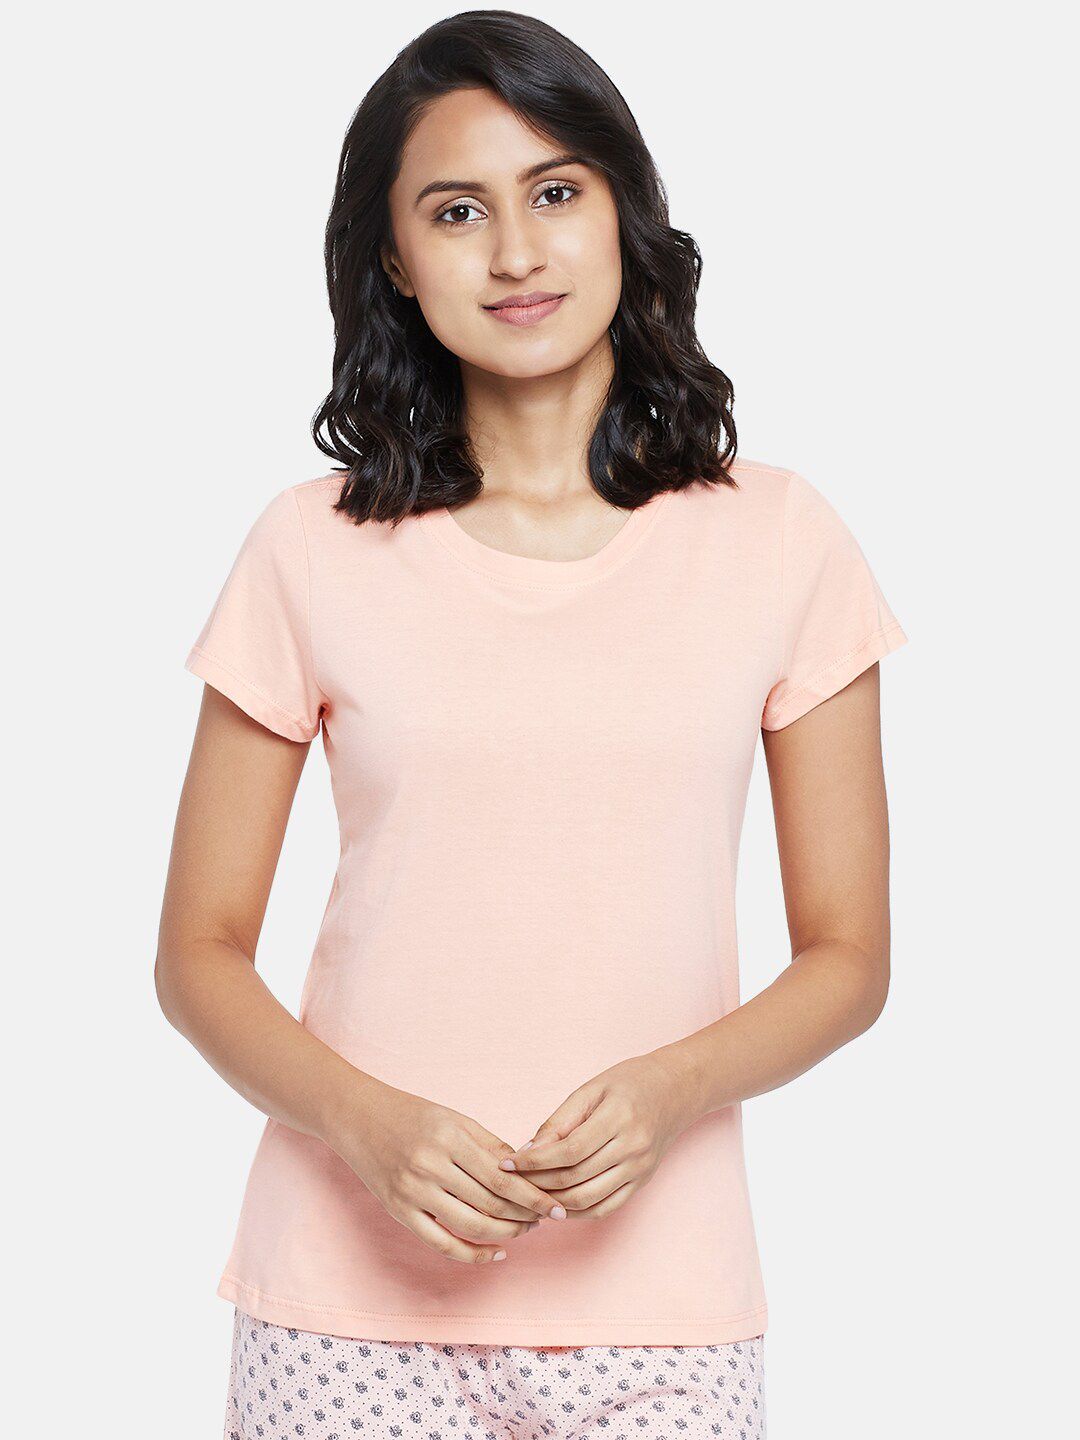 Dreamz by Pantaloons Women Peach-Coloured Regular Lounge tshirt Price in India